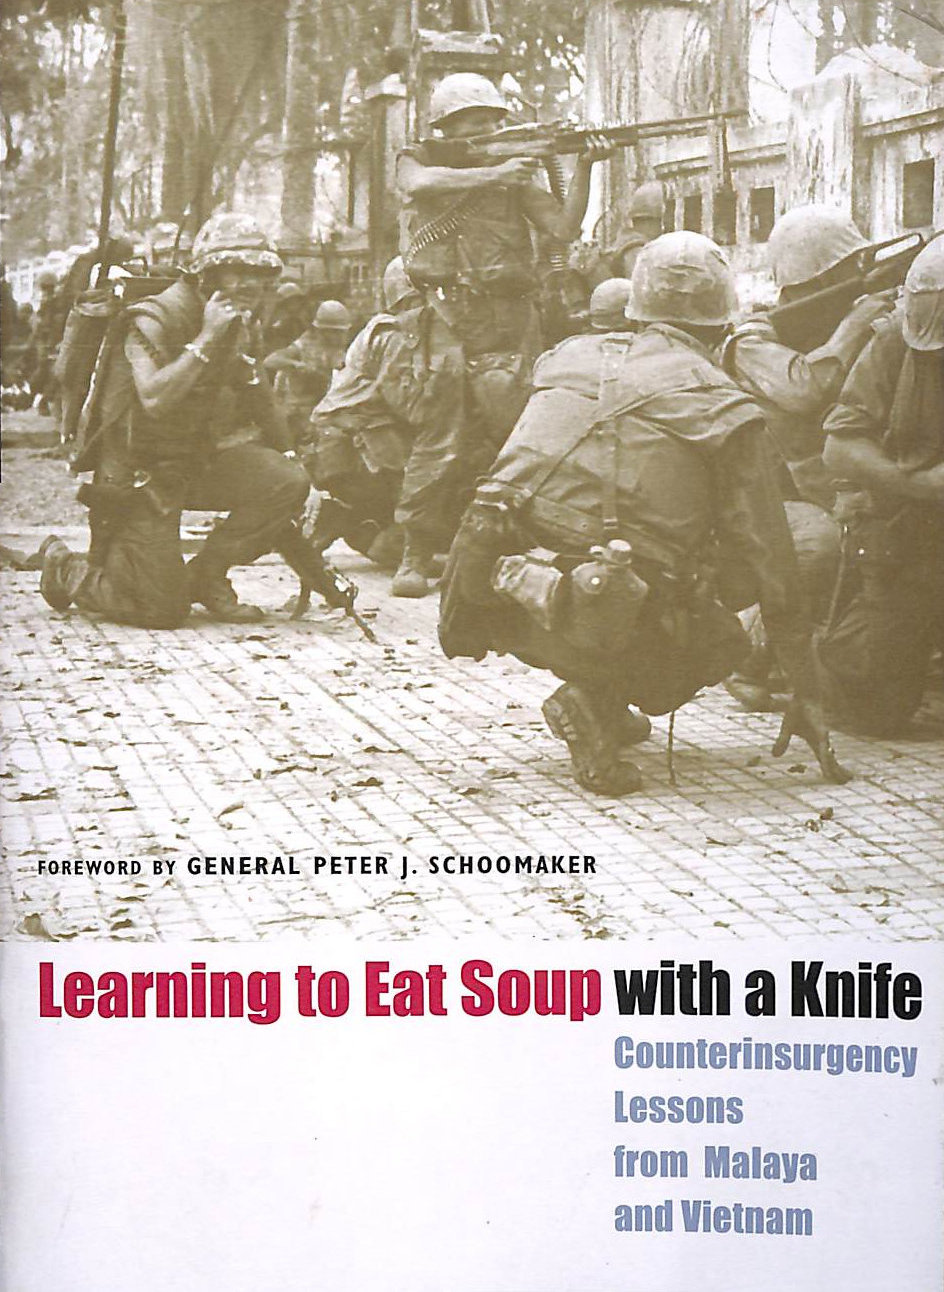 JOHN A. NAGL - Learning to Eat Soup with a Knife: Counterinsurgency Lessons from Malaya and Vietnam